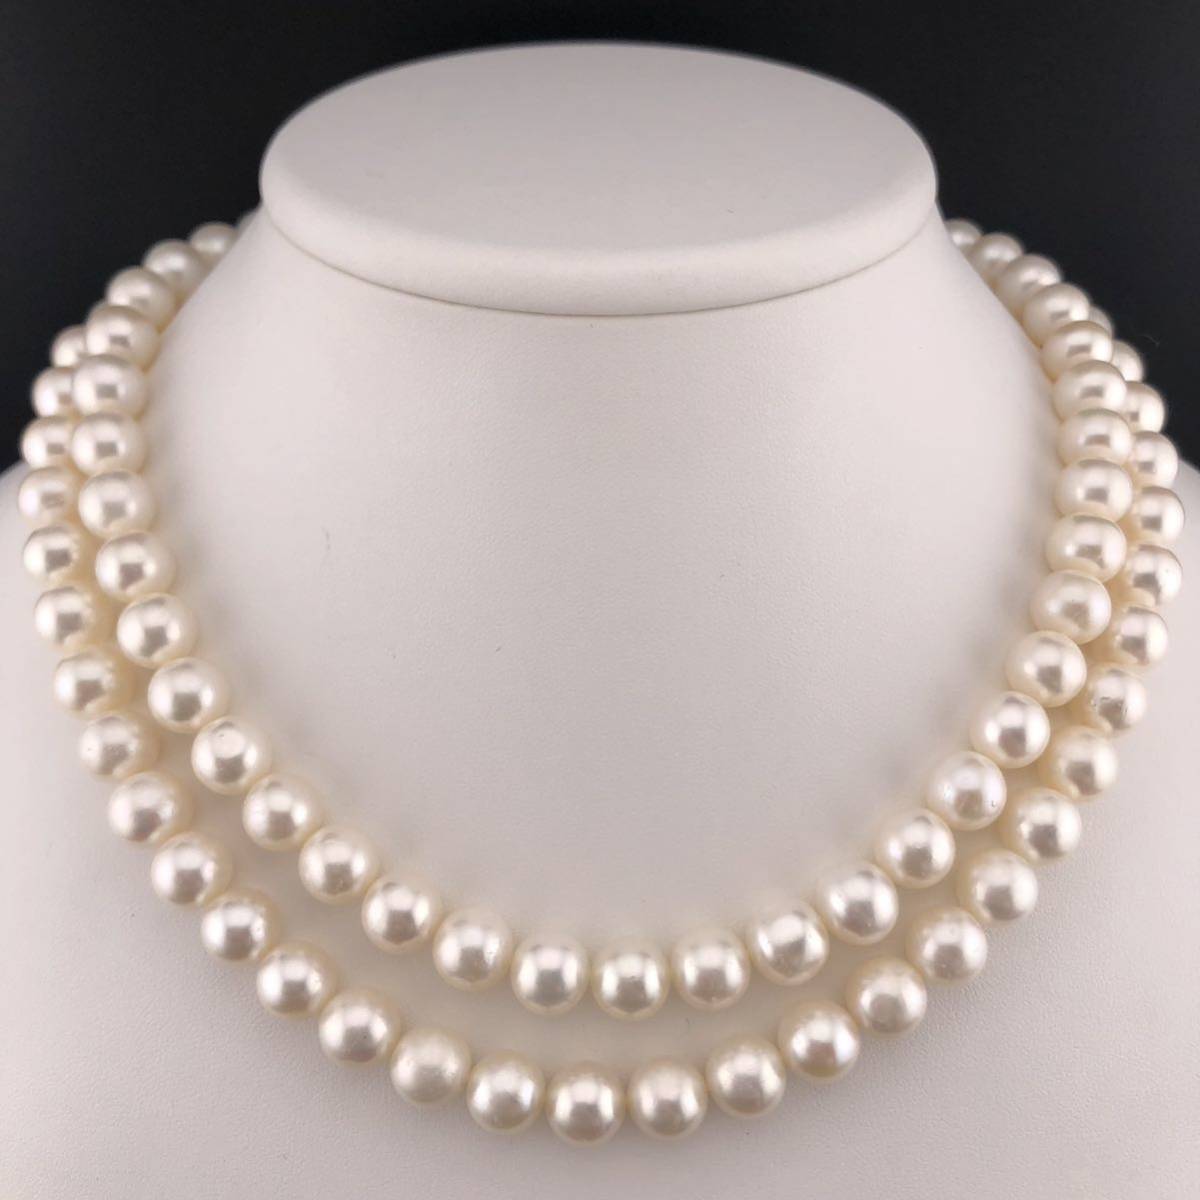 E11-1765 ロングパールネックレス 9.5mm~10.0mm 94cm 127g ( ロング Pearl necklace SILVER )_画像1